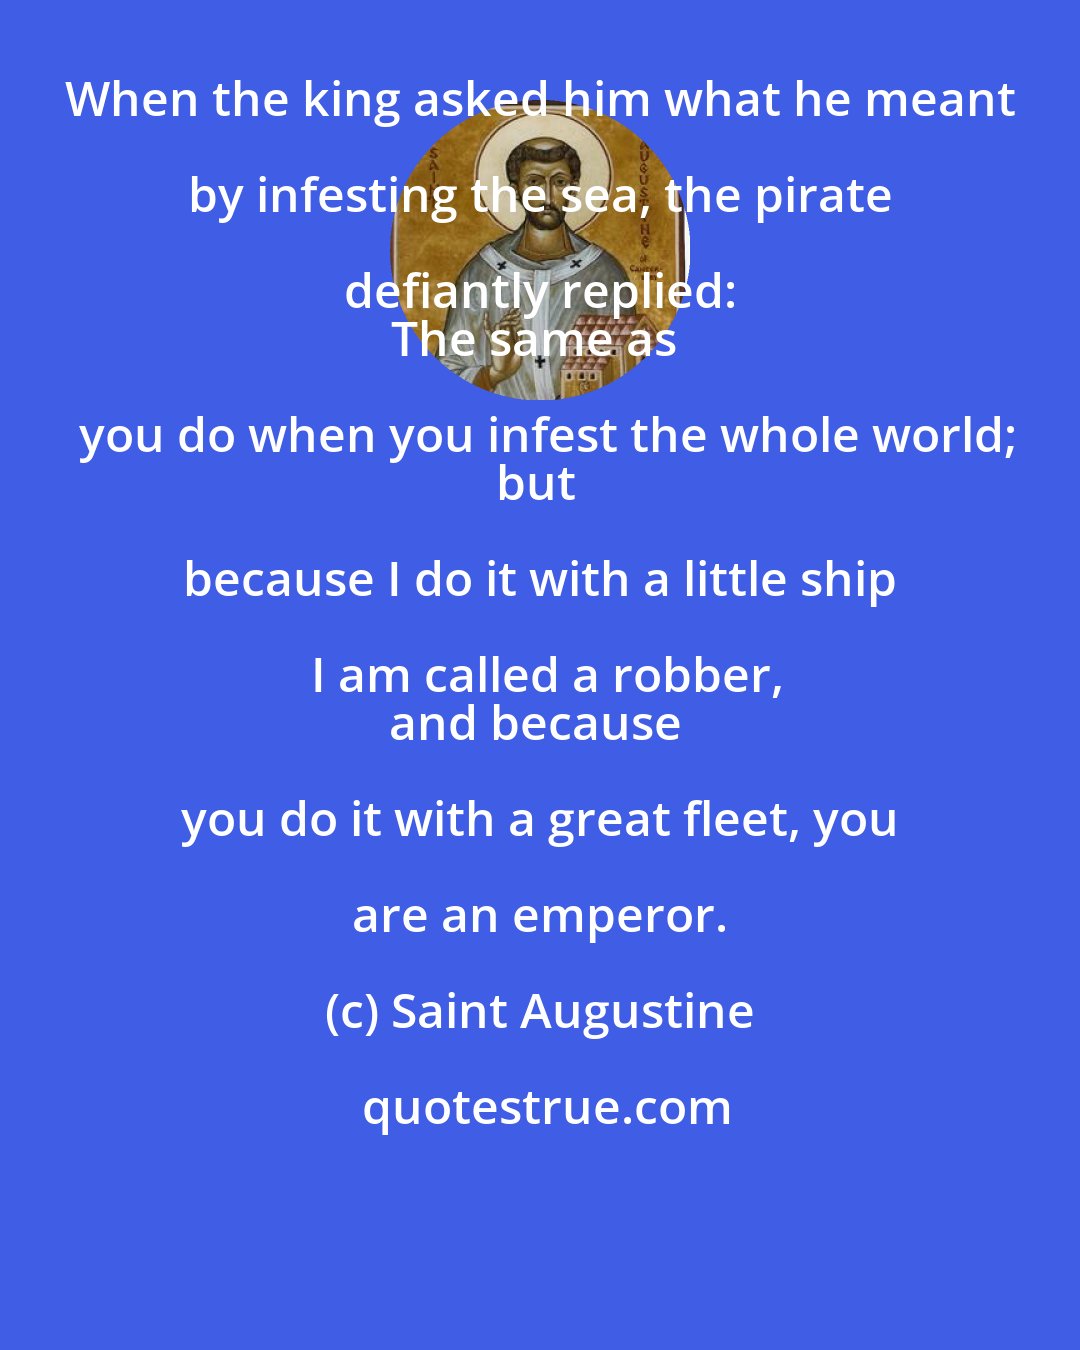 Saint Augustine: When the king asked him what he meant by infesting the sea, the pirate defiantly replied: 
The same as you do when you infest the whole world;
but because I do it with a little ship I am called a robber,
and because you do it with a great fleet, you are an emperor.